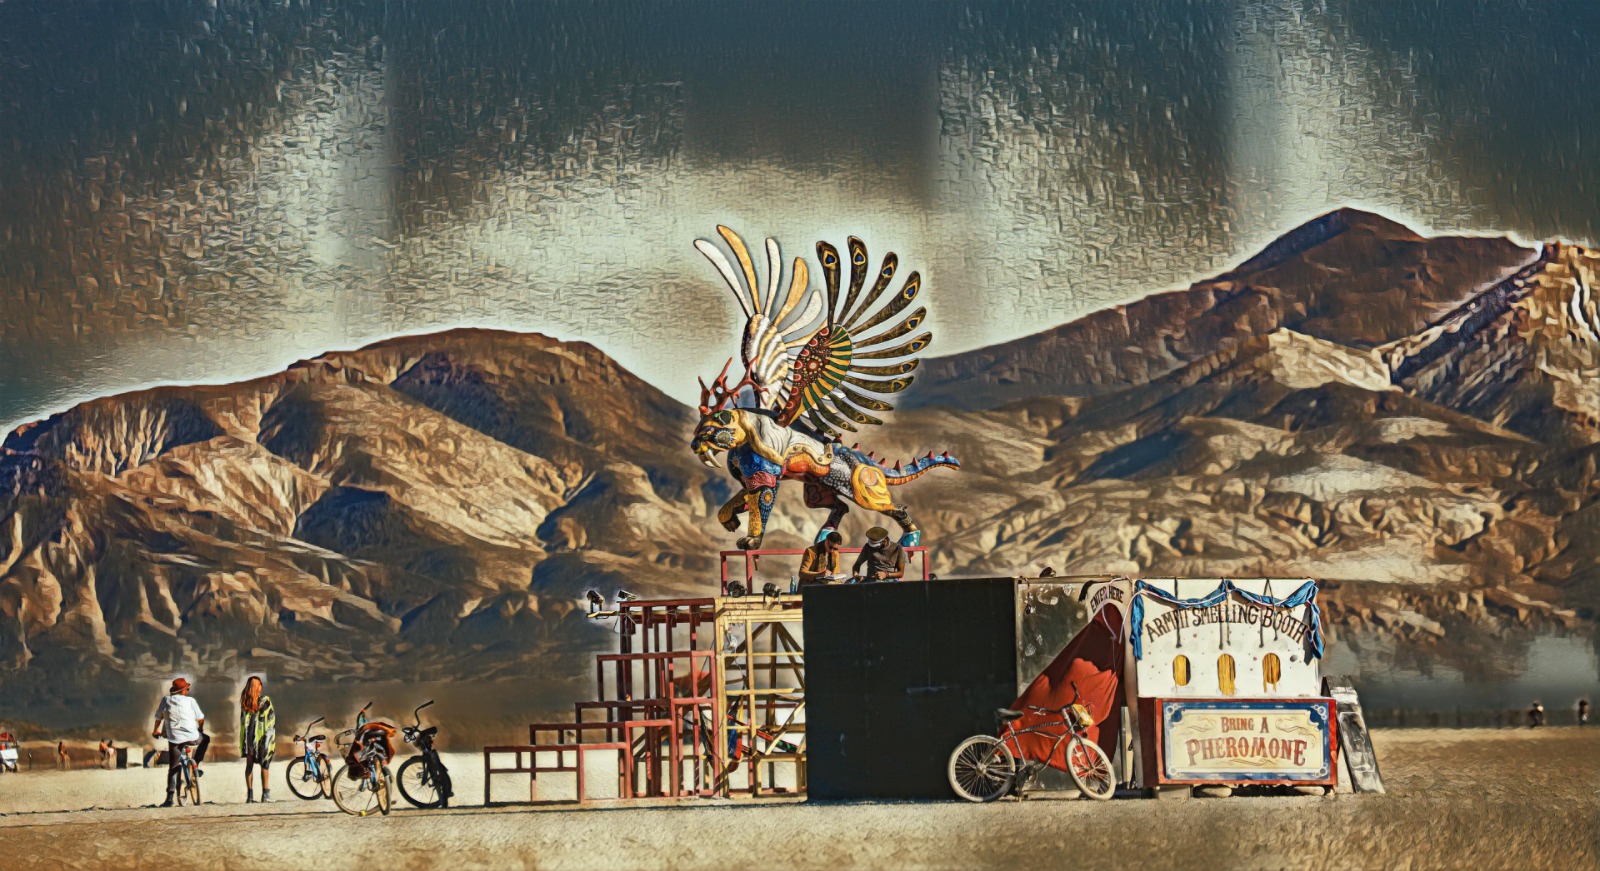 Alebrije in the Desert, First Series by Tomas Loewy